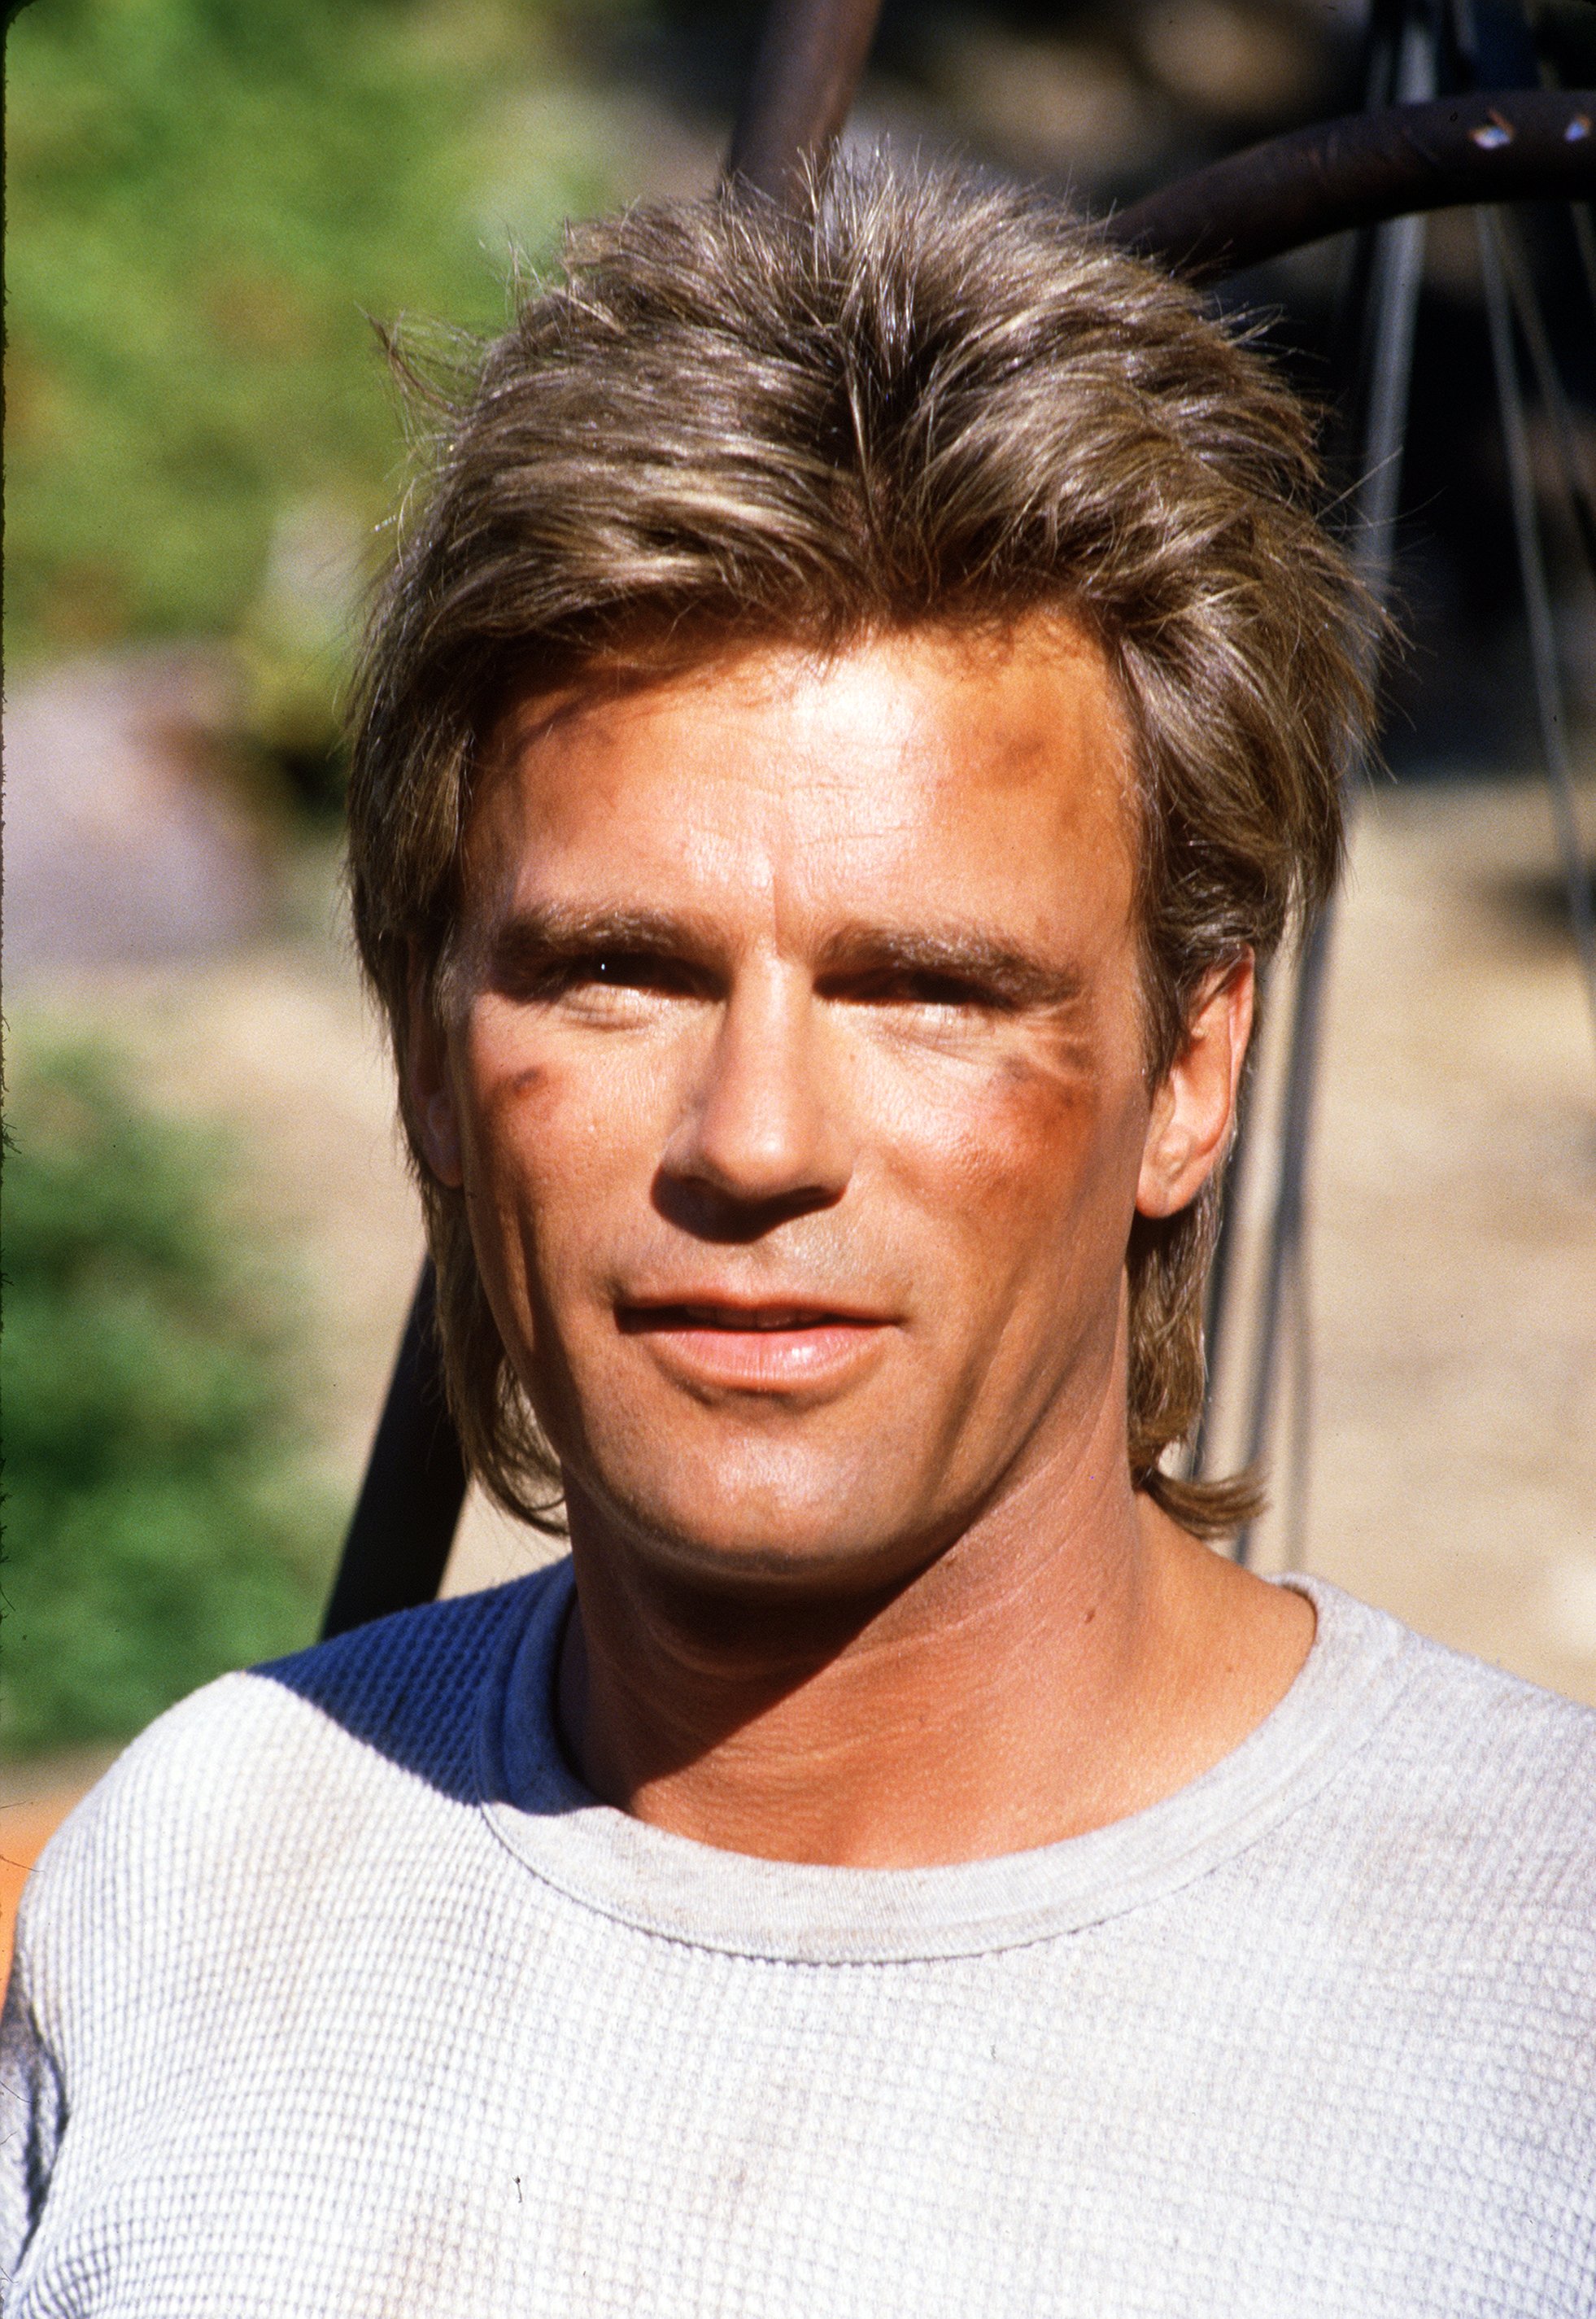 Richard Dean Anderson photographed in the United States in 1987. | Source: Getty Images